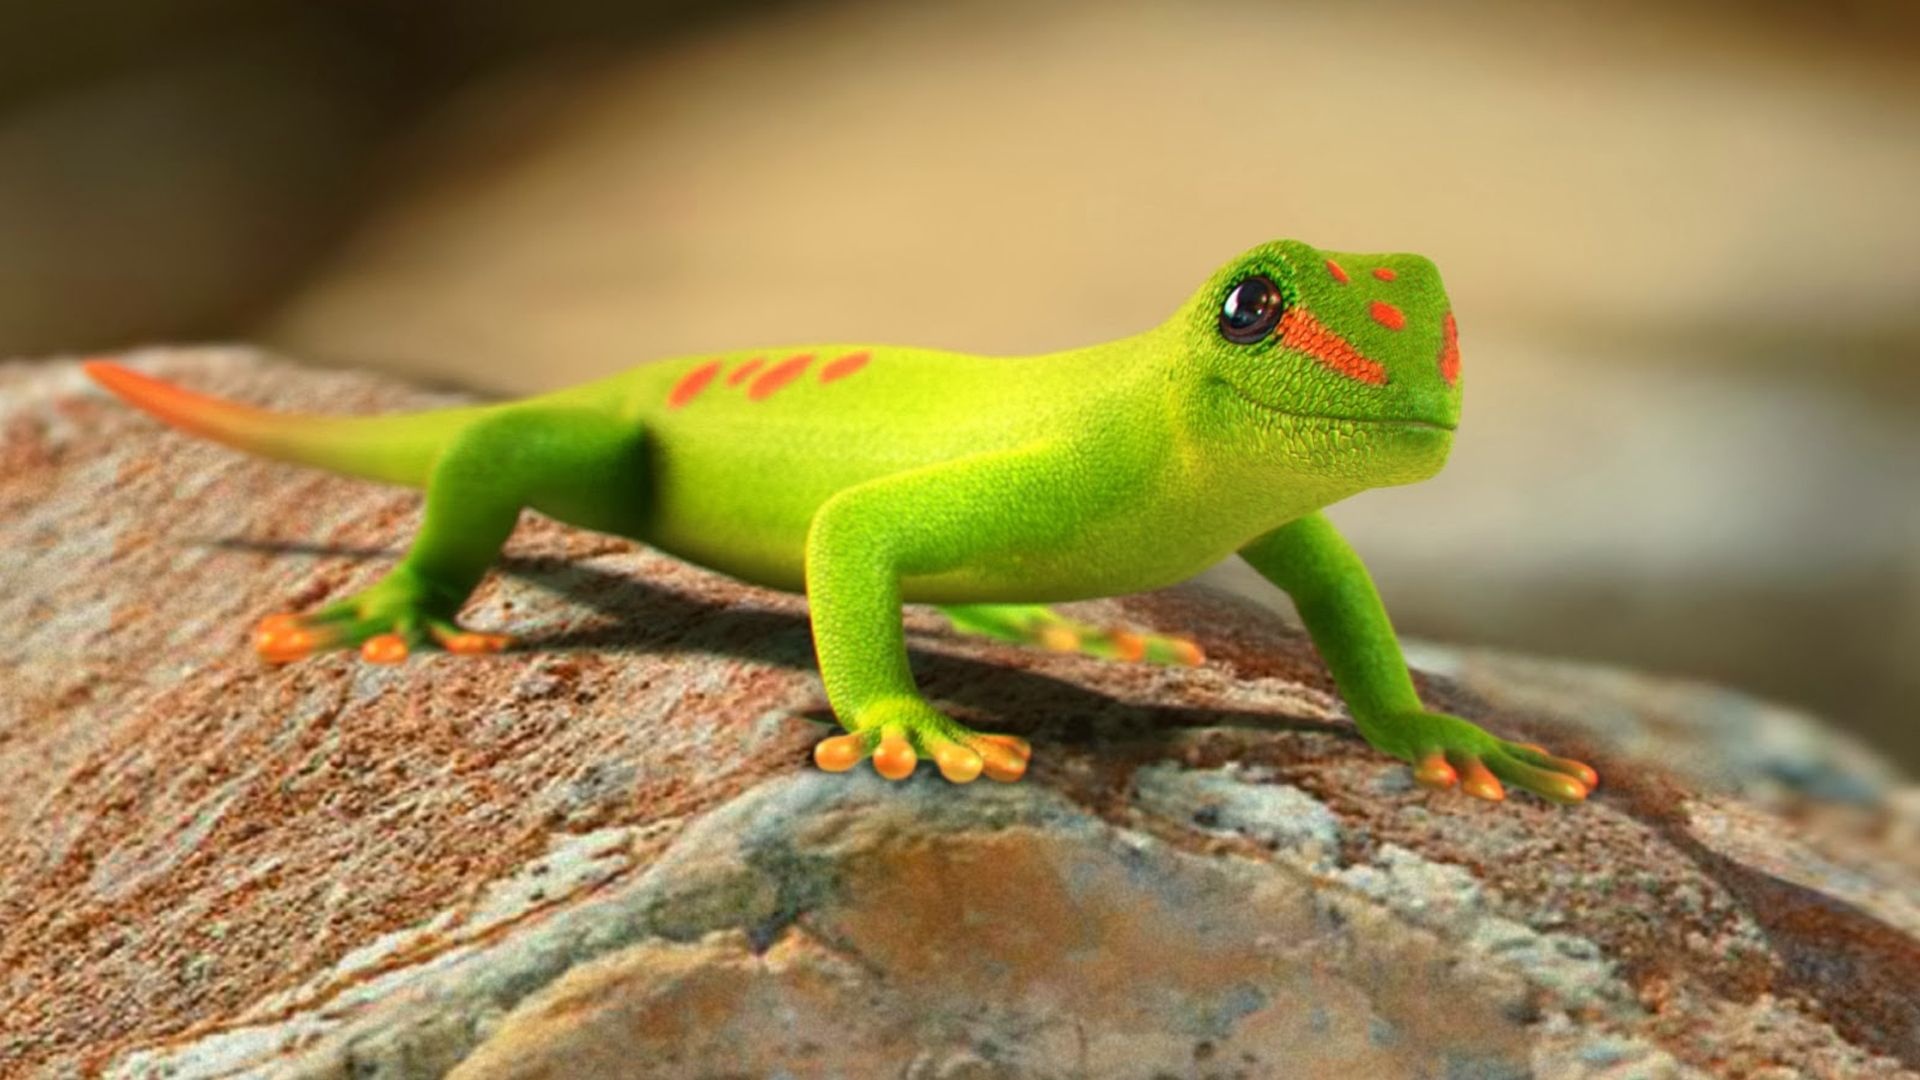 Gecko: Reptiles, Cold-blooded animal. 1920x1080 Full HD Background.